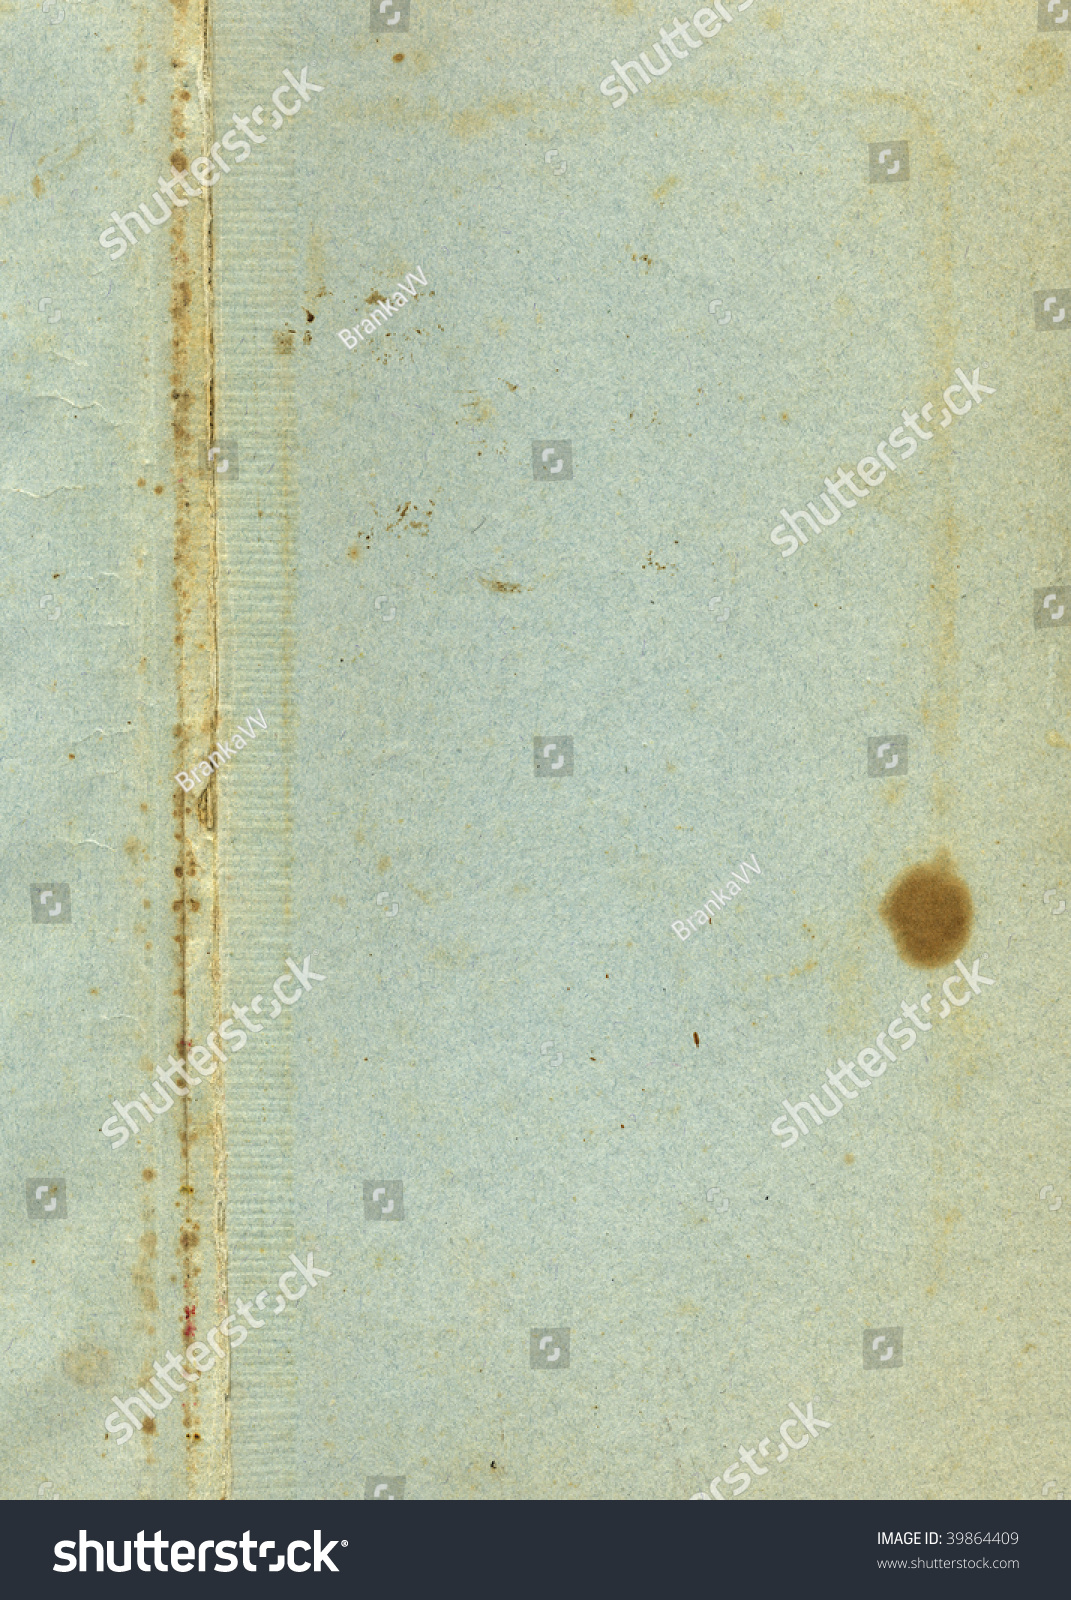 Old stained paper #39864409